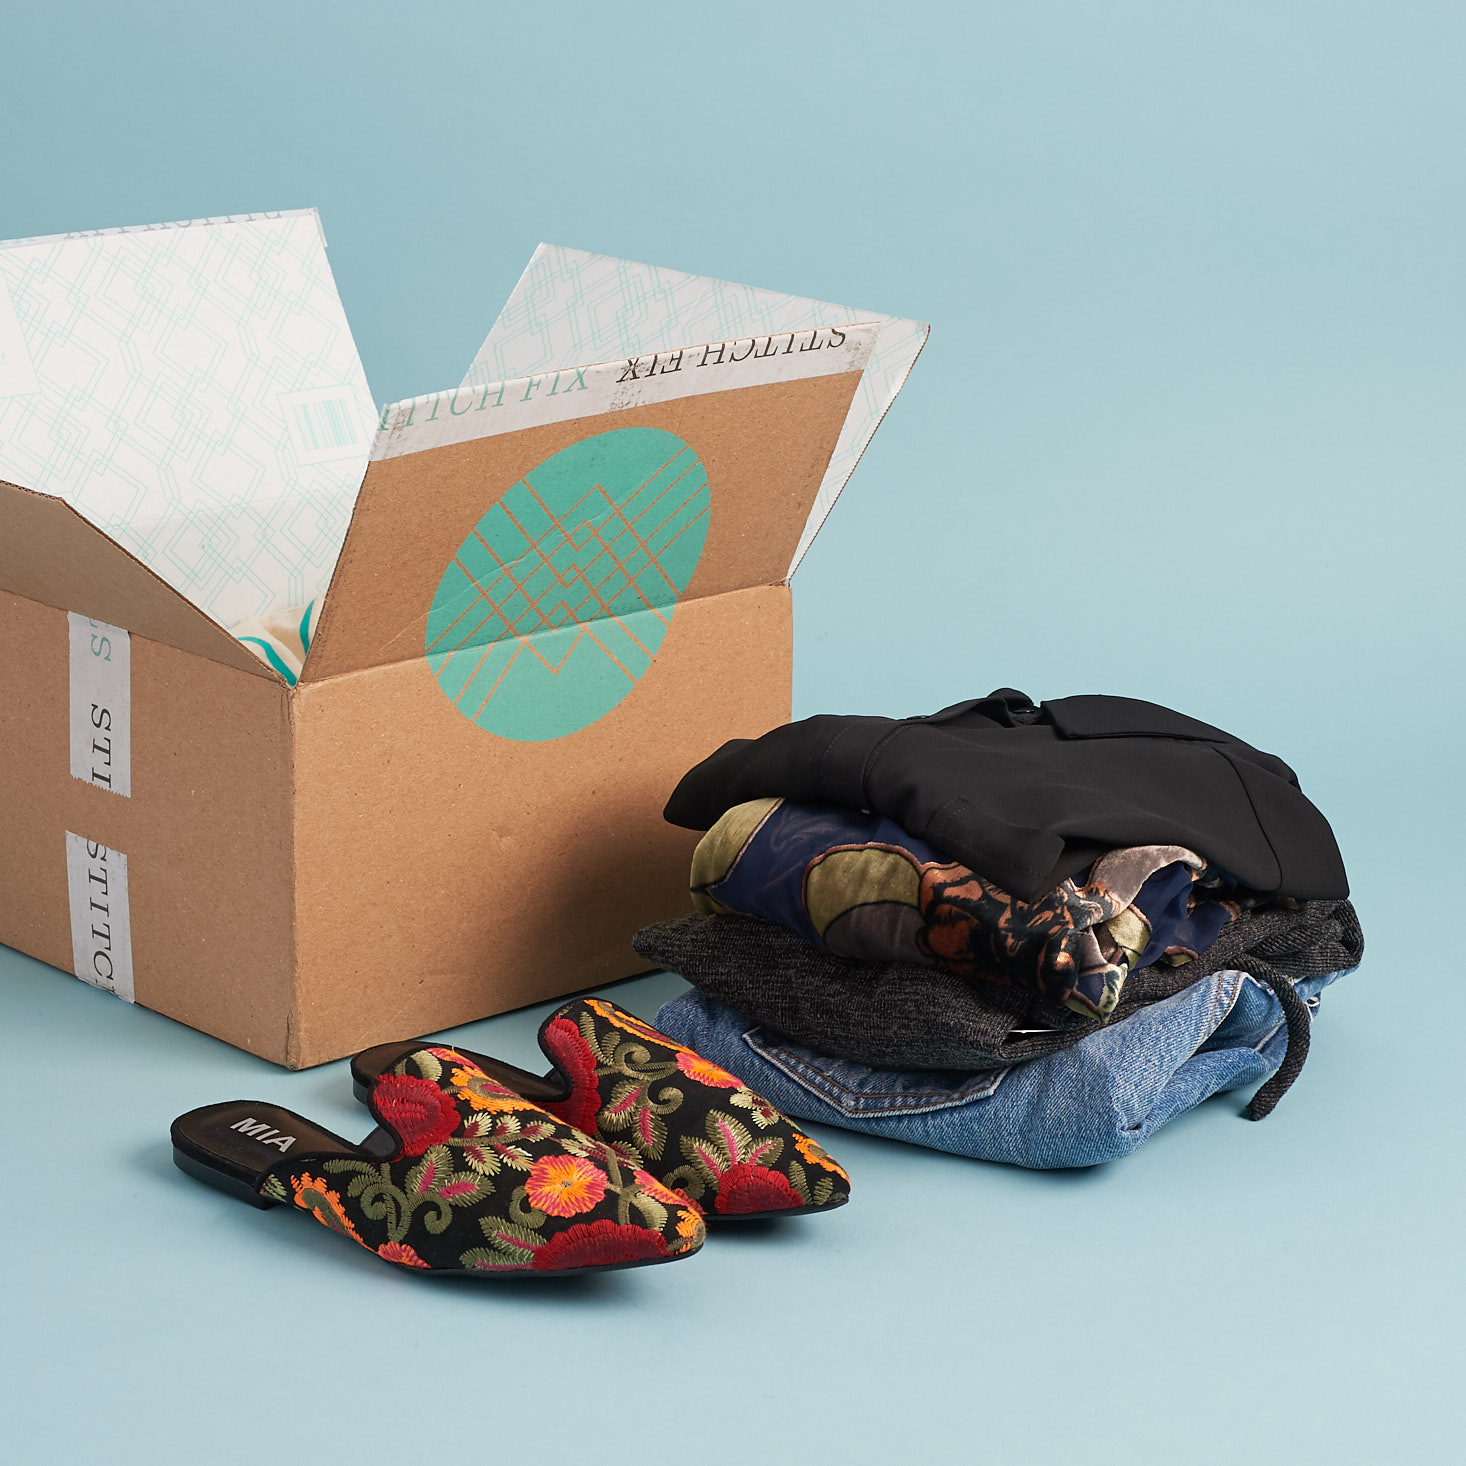 Stitch Fix Clothing Subscription Box Review – October 2017